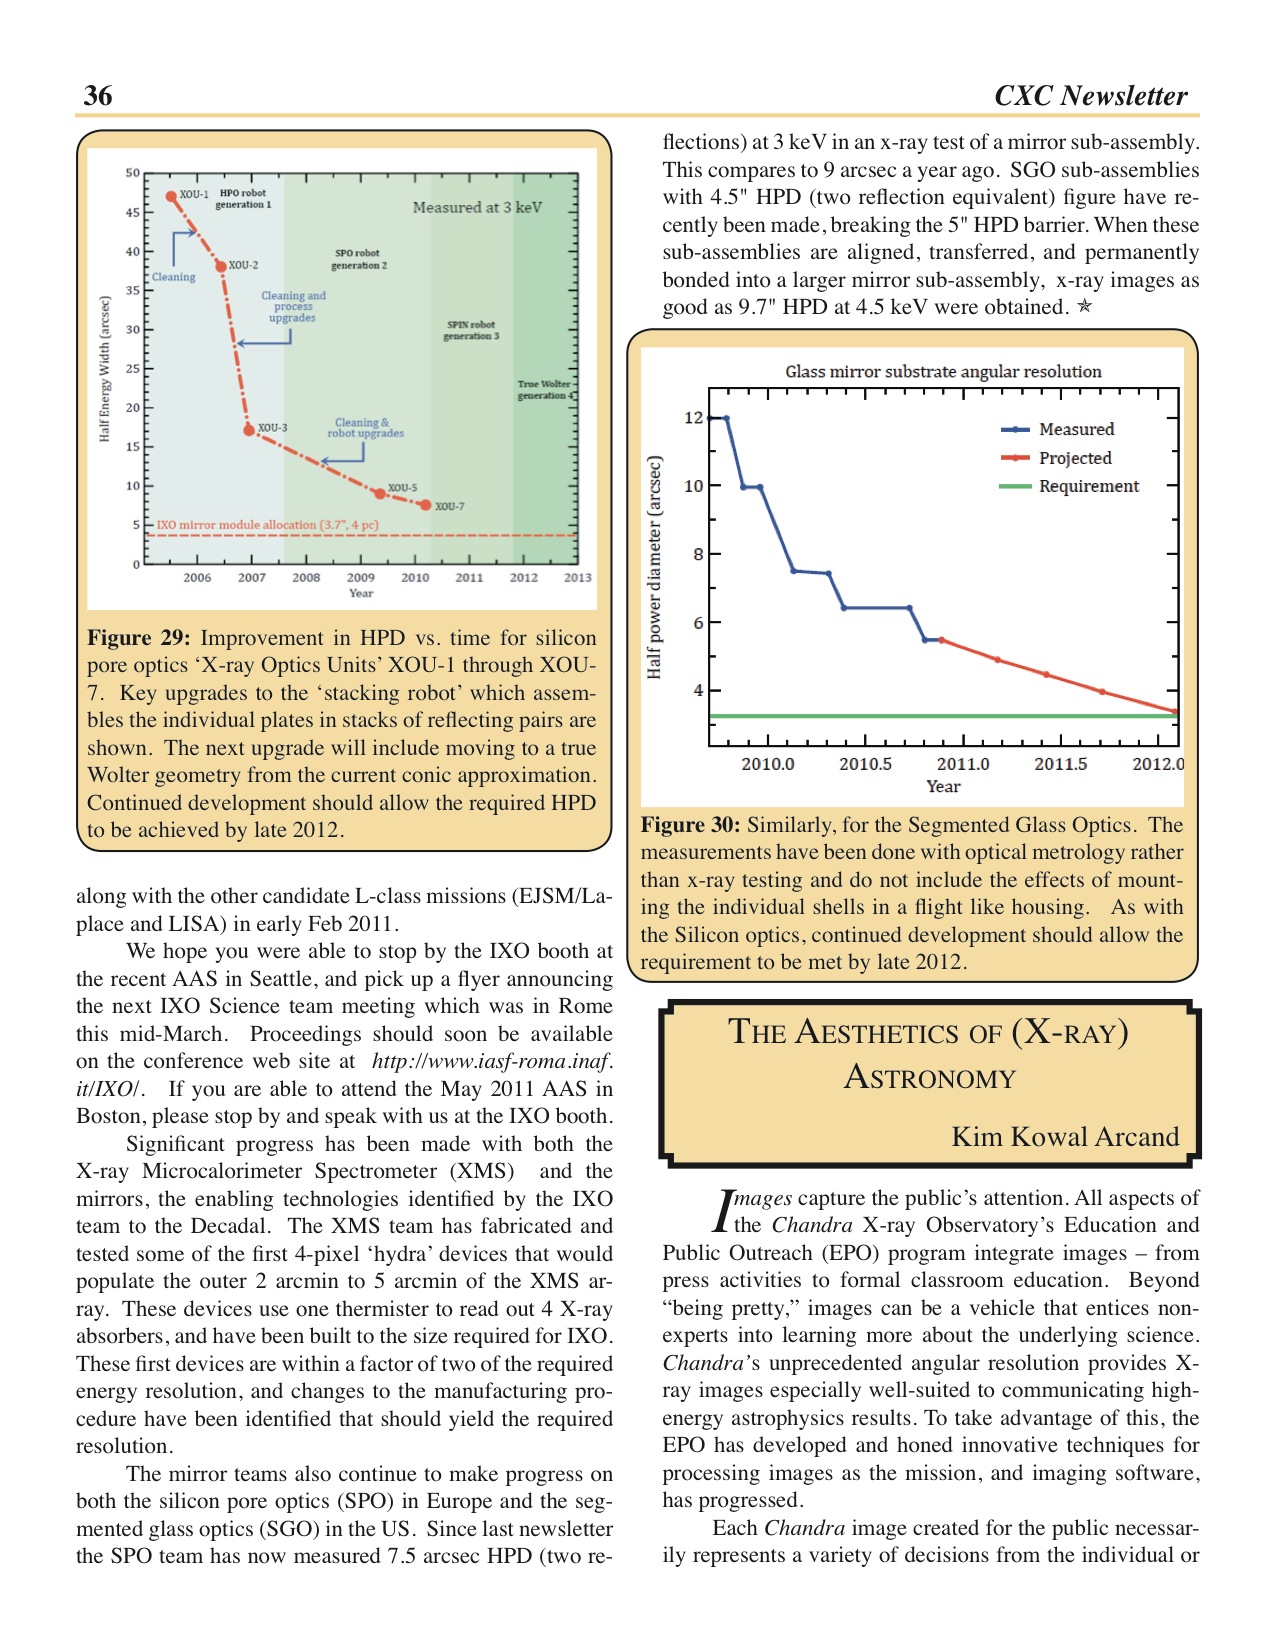 Page 36 of the Chandra Newsletter, issue 18.